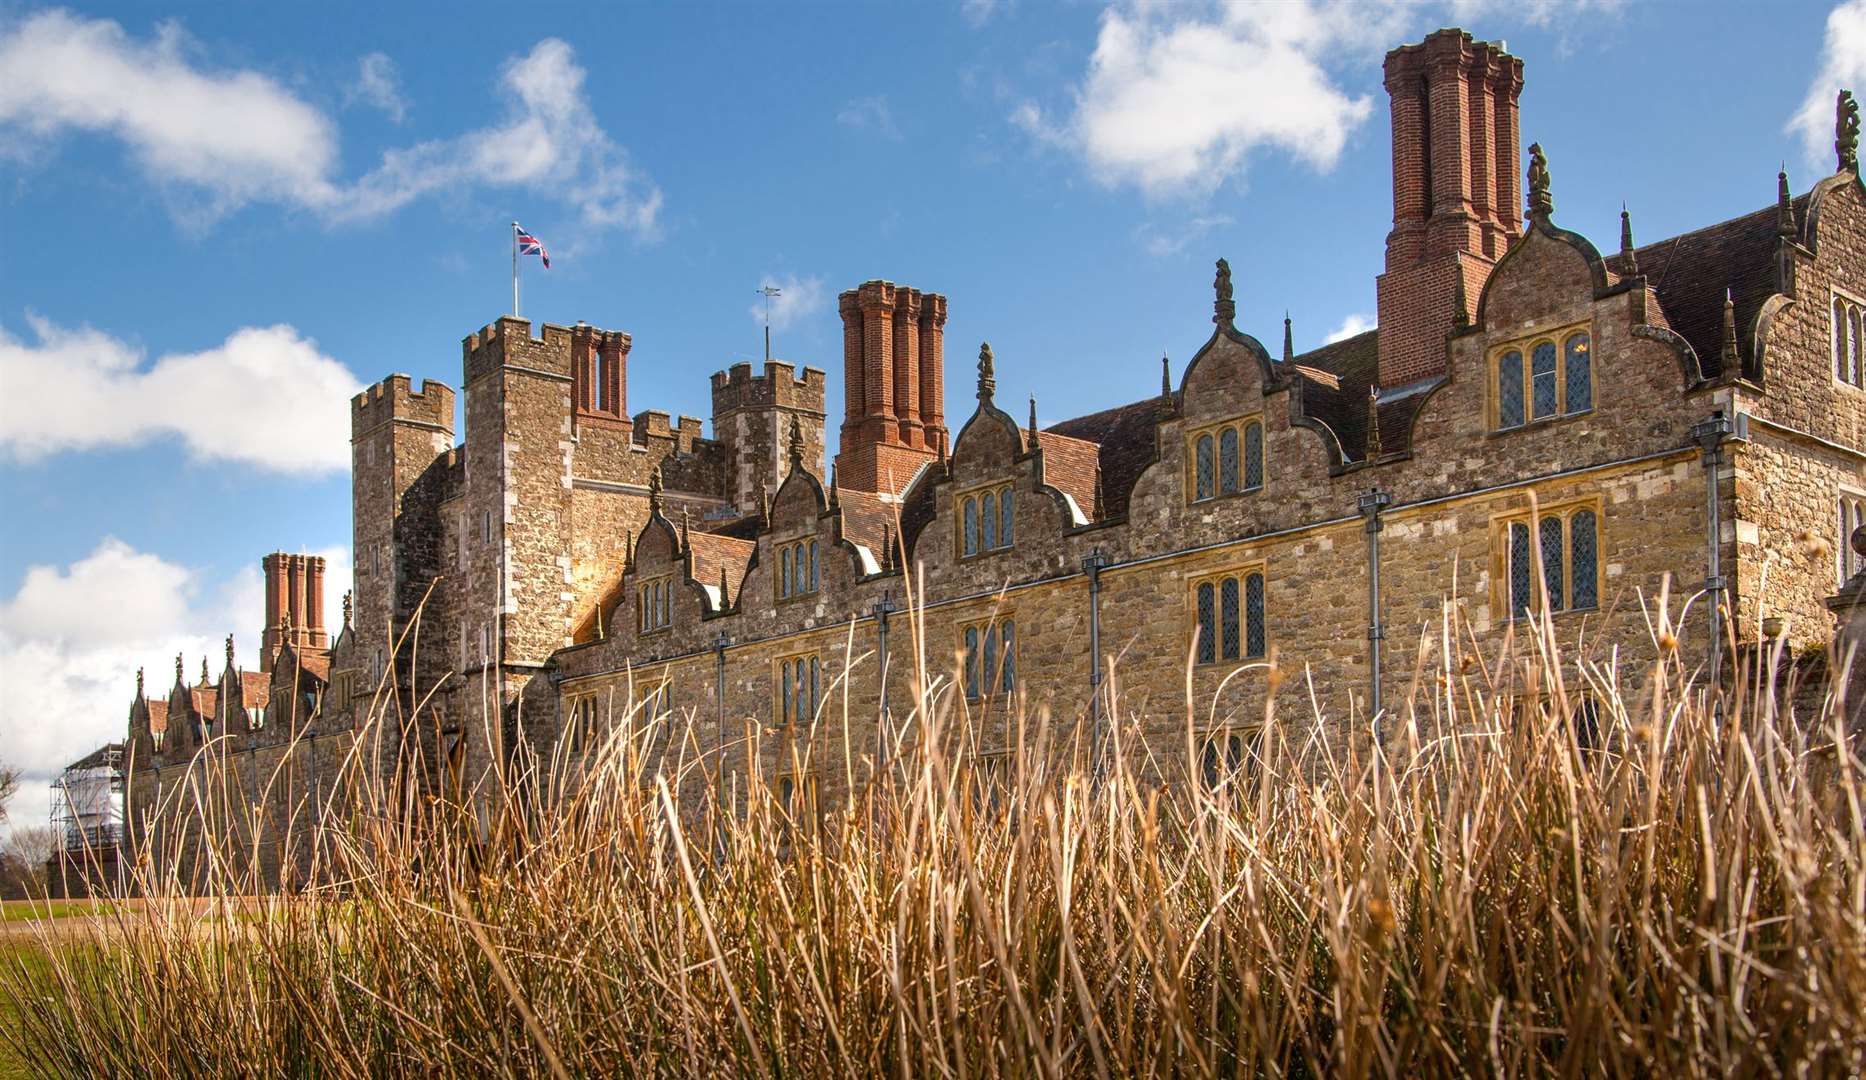 Knole was the childhood home of Vita Sackville-West who went on to live at Sissinghurst Castle